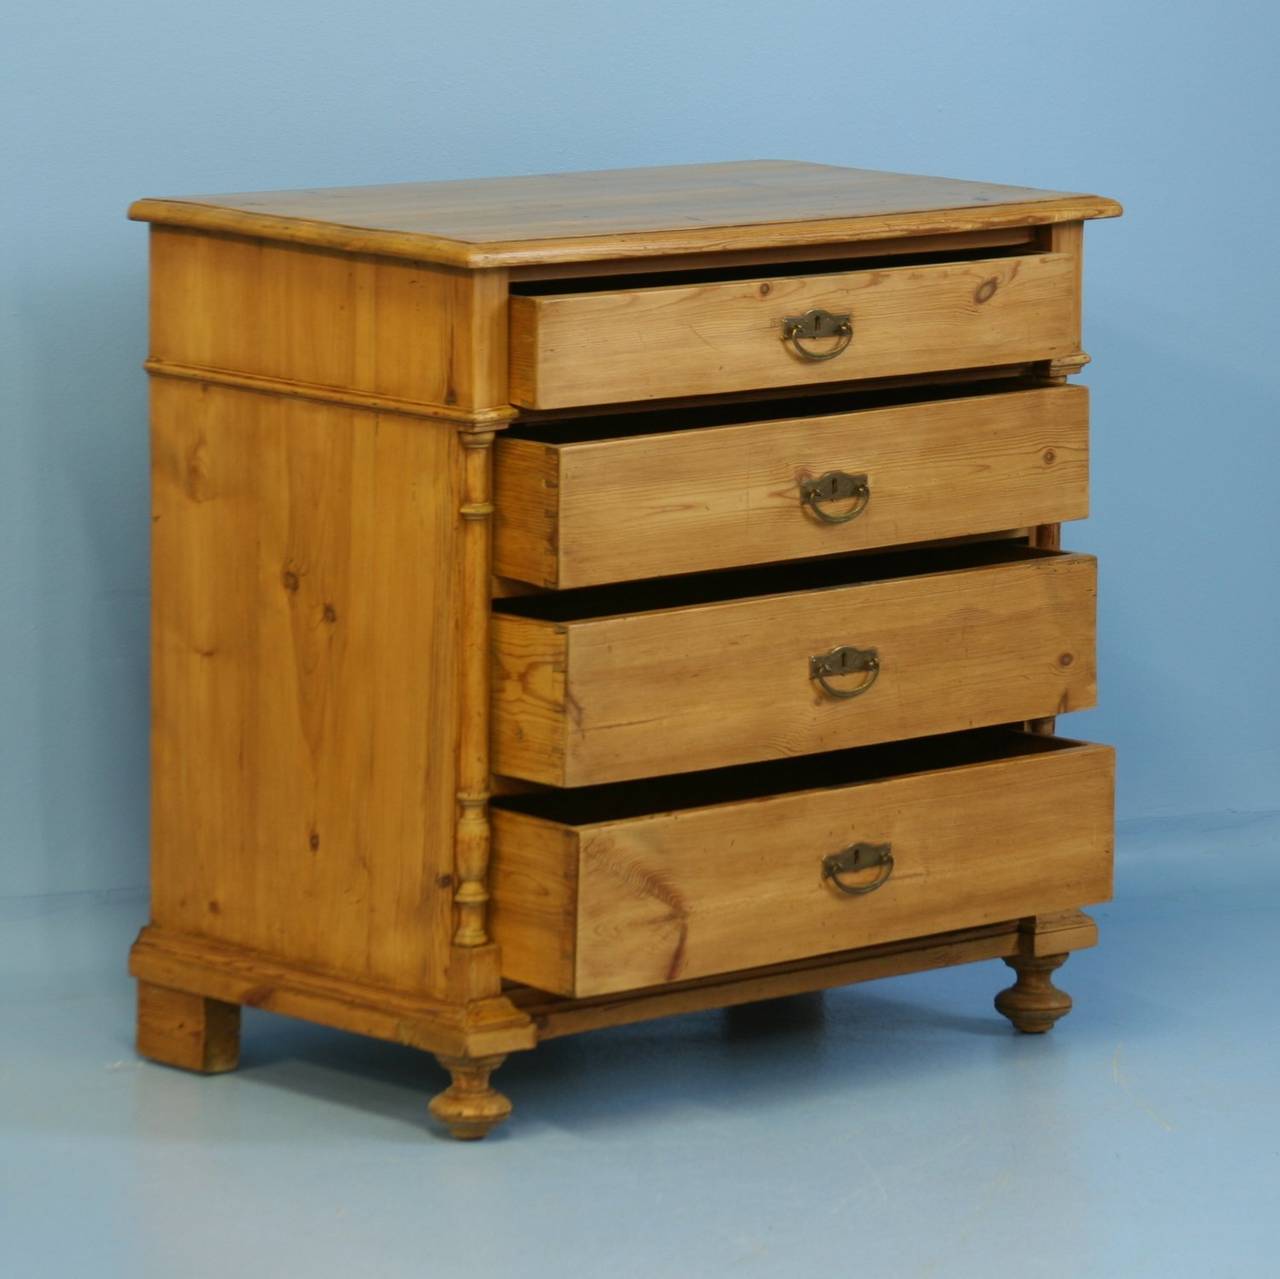 Danish Antique Pine Chest of Drawers with Turned Column Details, Denmark circa 1880